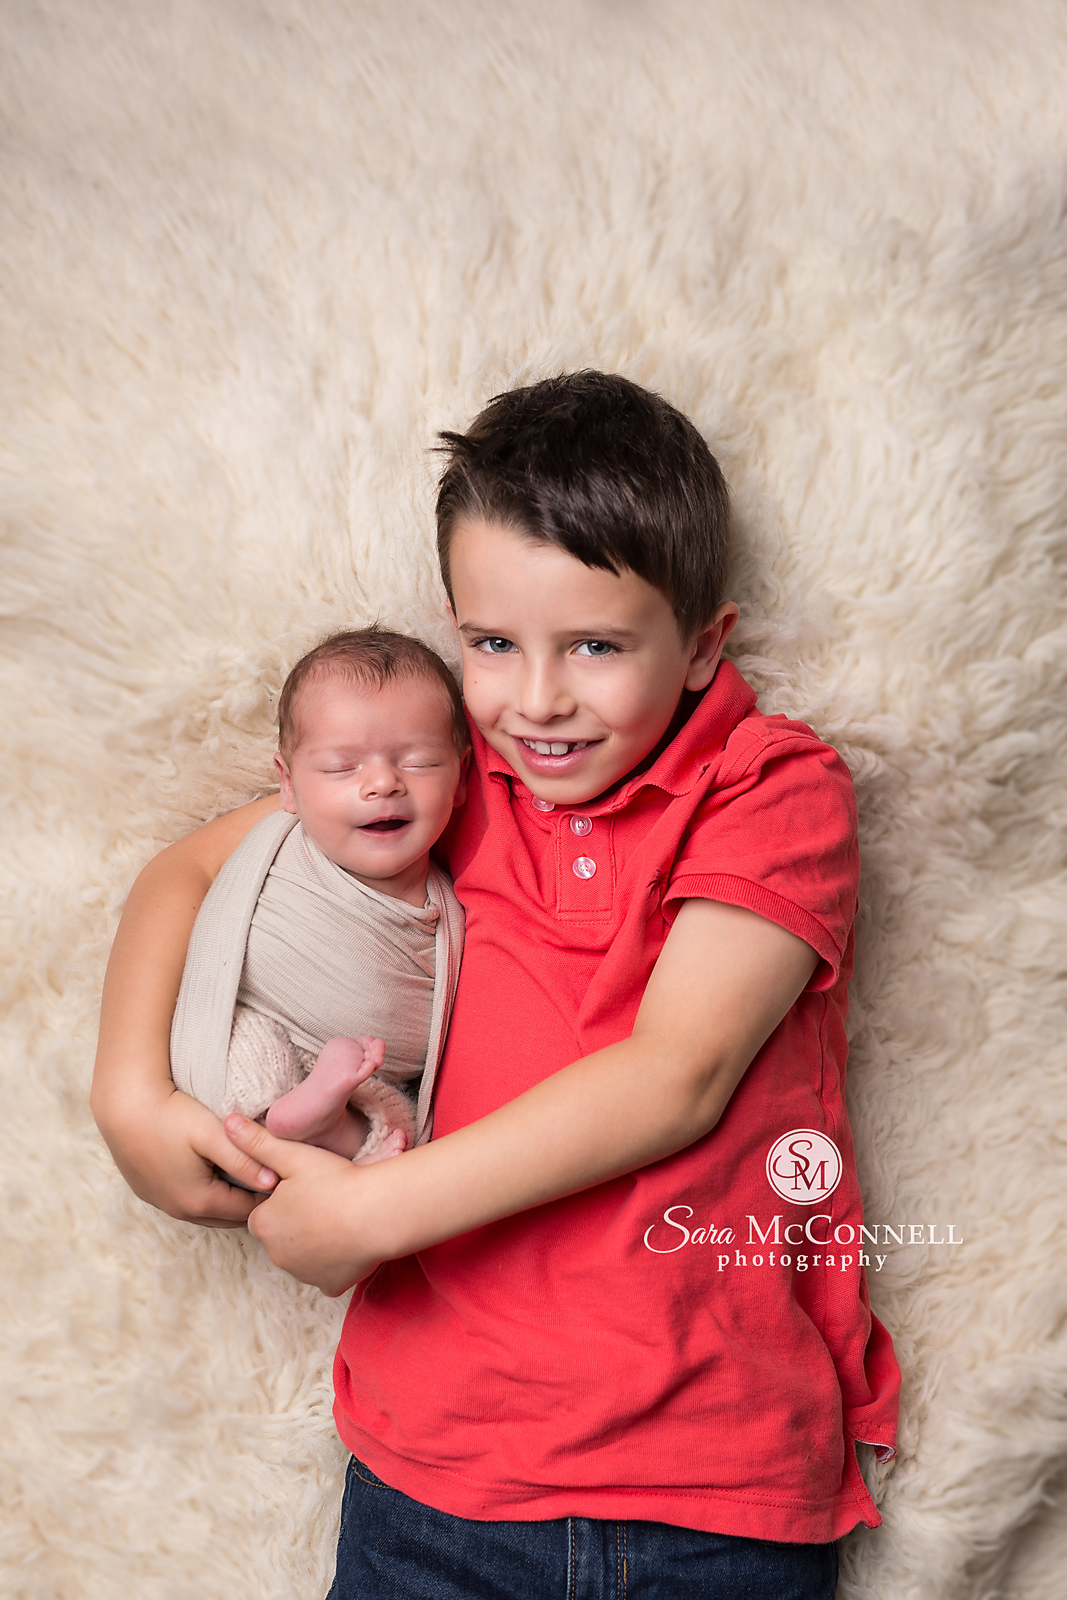 Ottawa Newborn Photographer | Special session with her brother